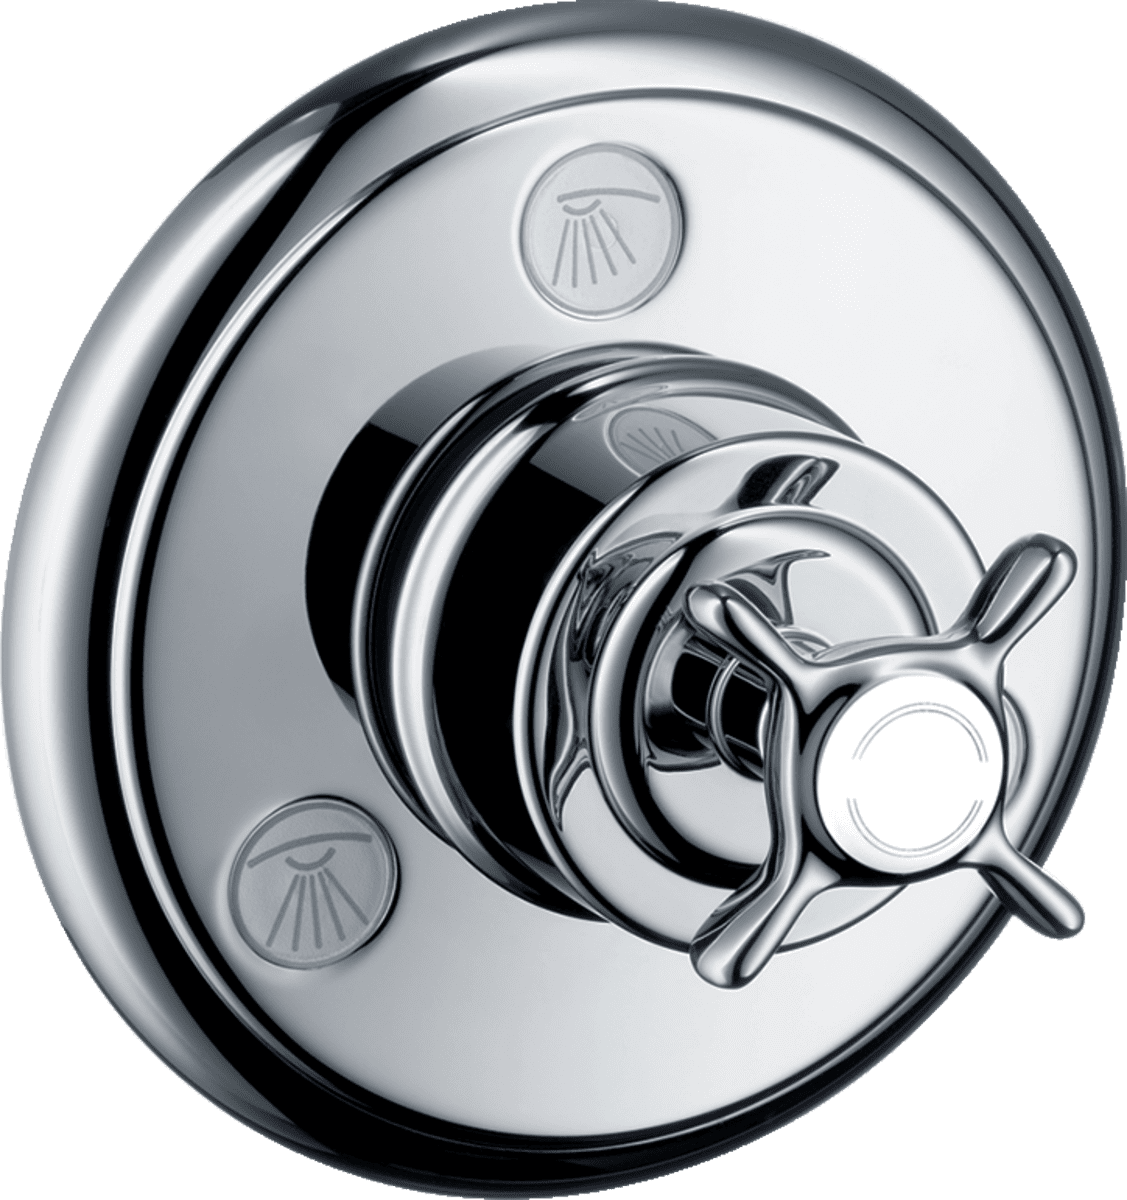 Picture of HANSGROHE AXOR Montreux Shut-off/ diverter valve Trio/ Quattro for concealed installation with cross handle #16830000 - Chrome